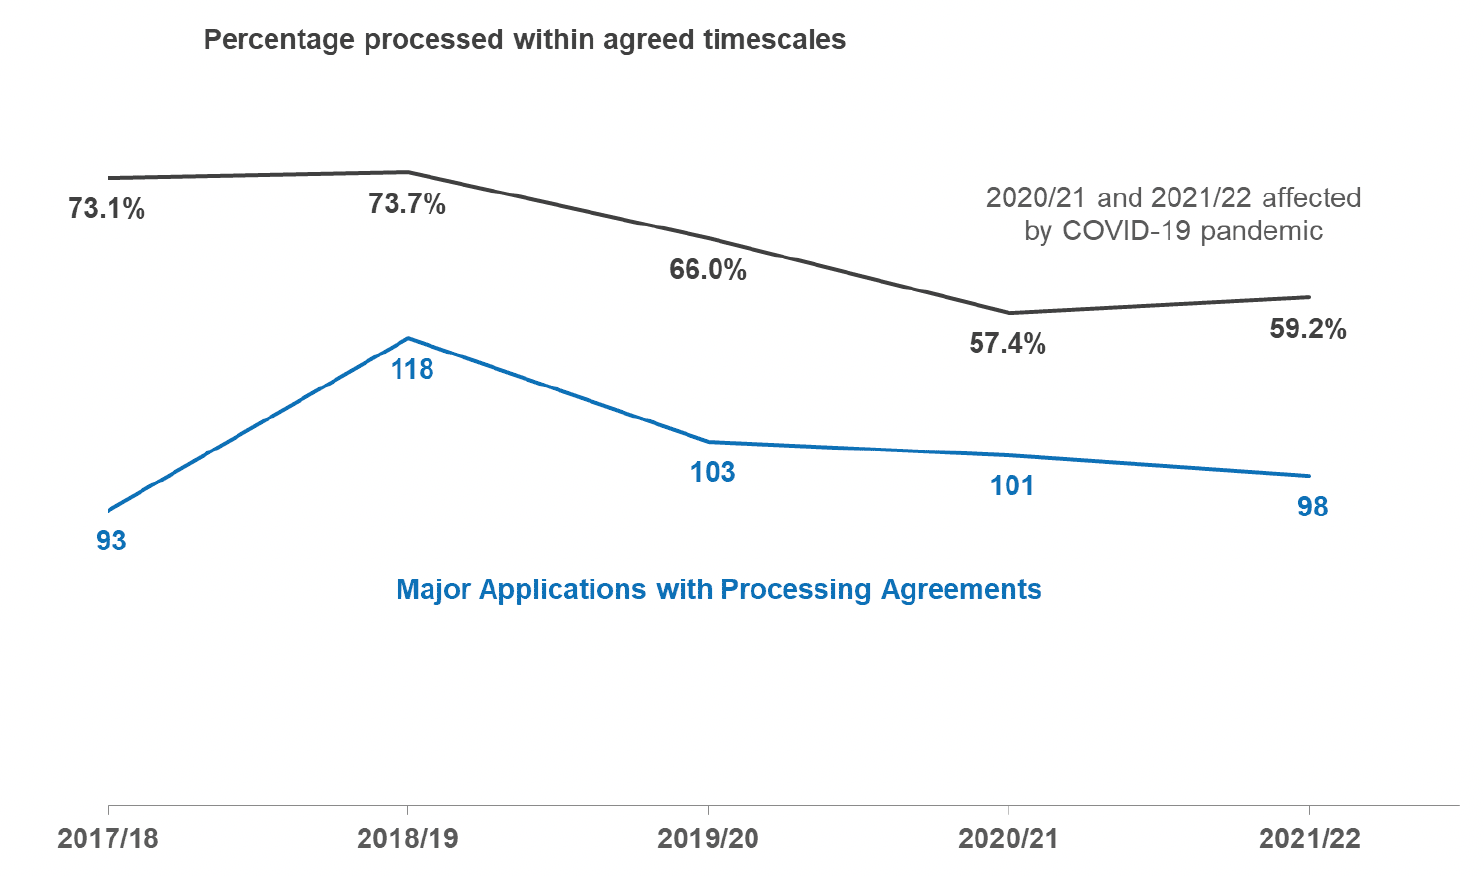 A line chart showing the number of major applications with processing agreements and the percentage processed within agreed timescales since 2017/18. The number of processing agreements is fairly steady at around 100 making up about a third of applications. The percentage within agreed timescales has fallen since 2018/19 by over 14 percentage points to 59%.